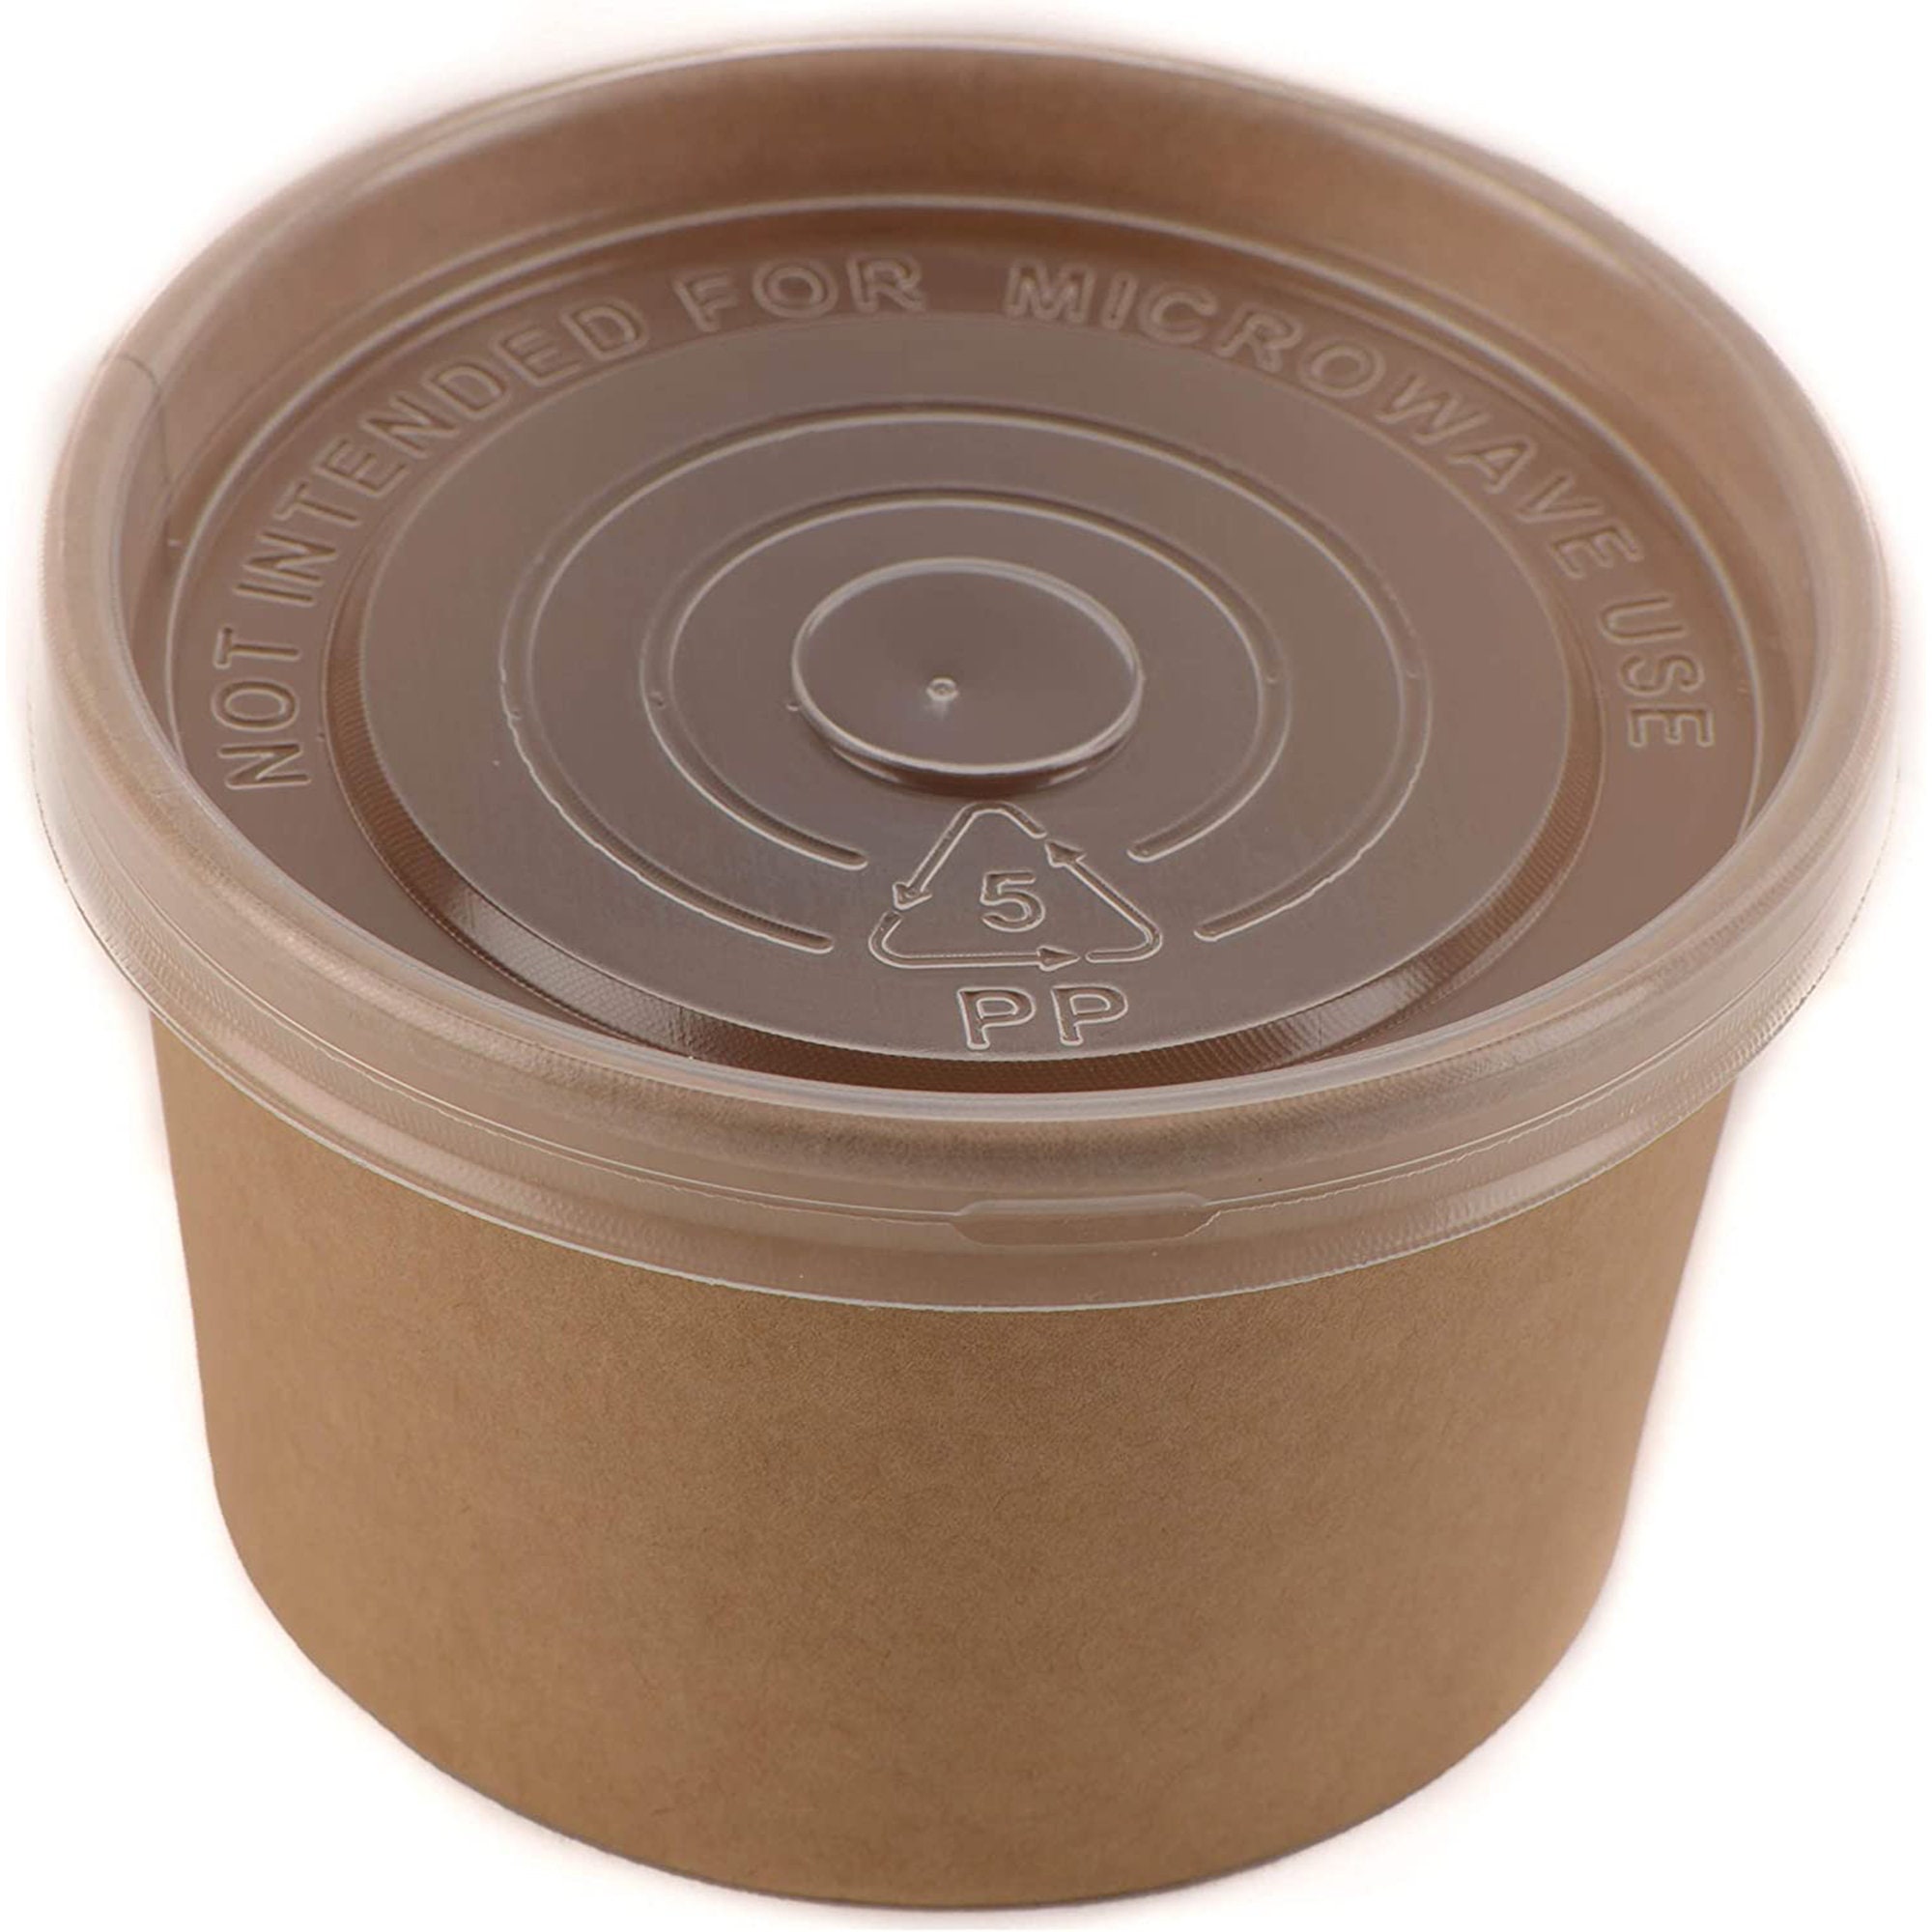 Microwavable And Freezer Safe Kraft Paper Bowls , Snack Disposable Soup  Container